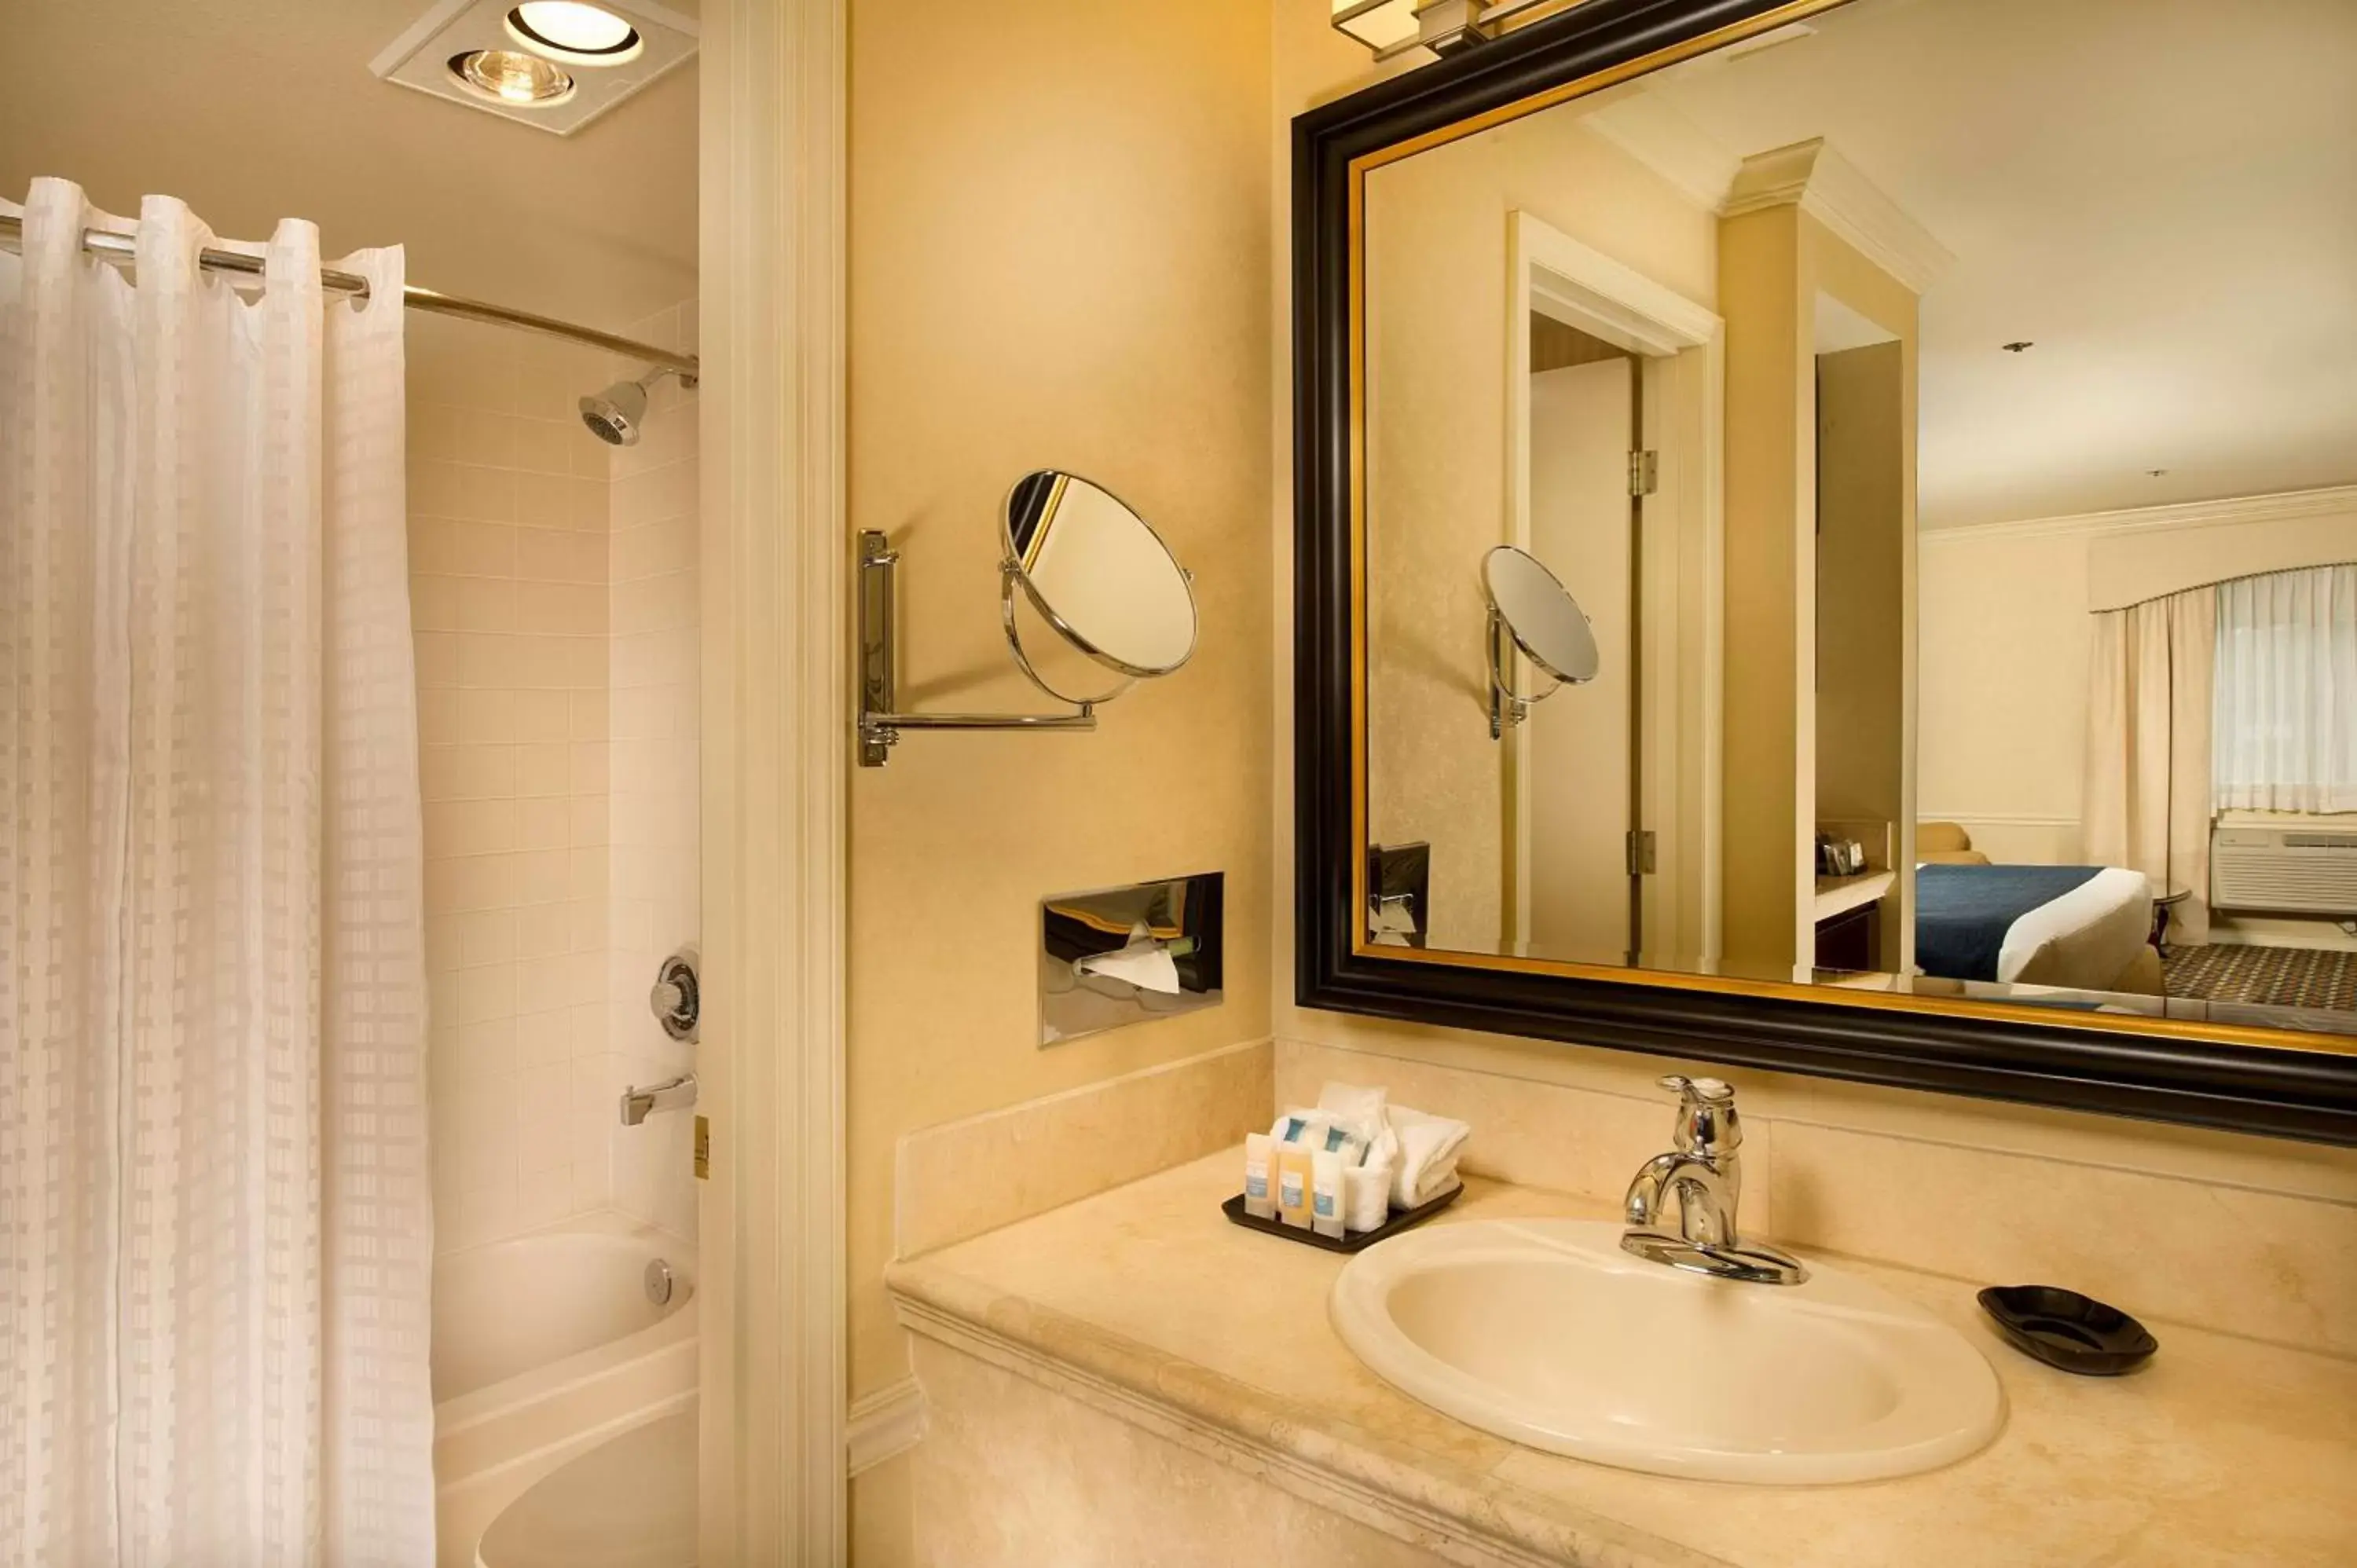 Bathroom in Best Western Premier Plaza Hotel and Conference Center